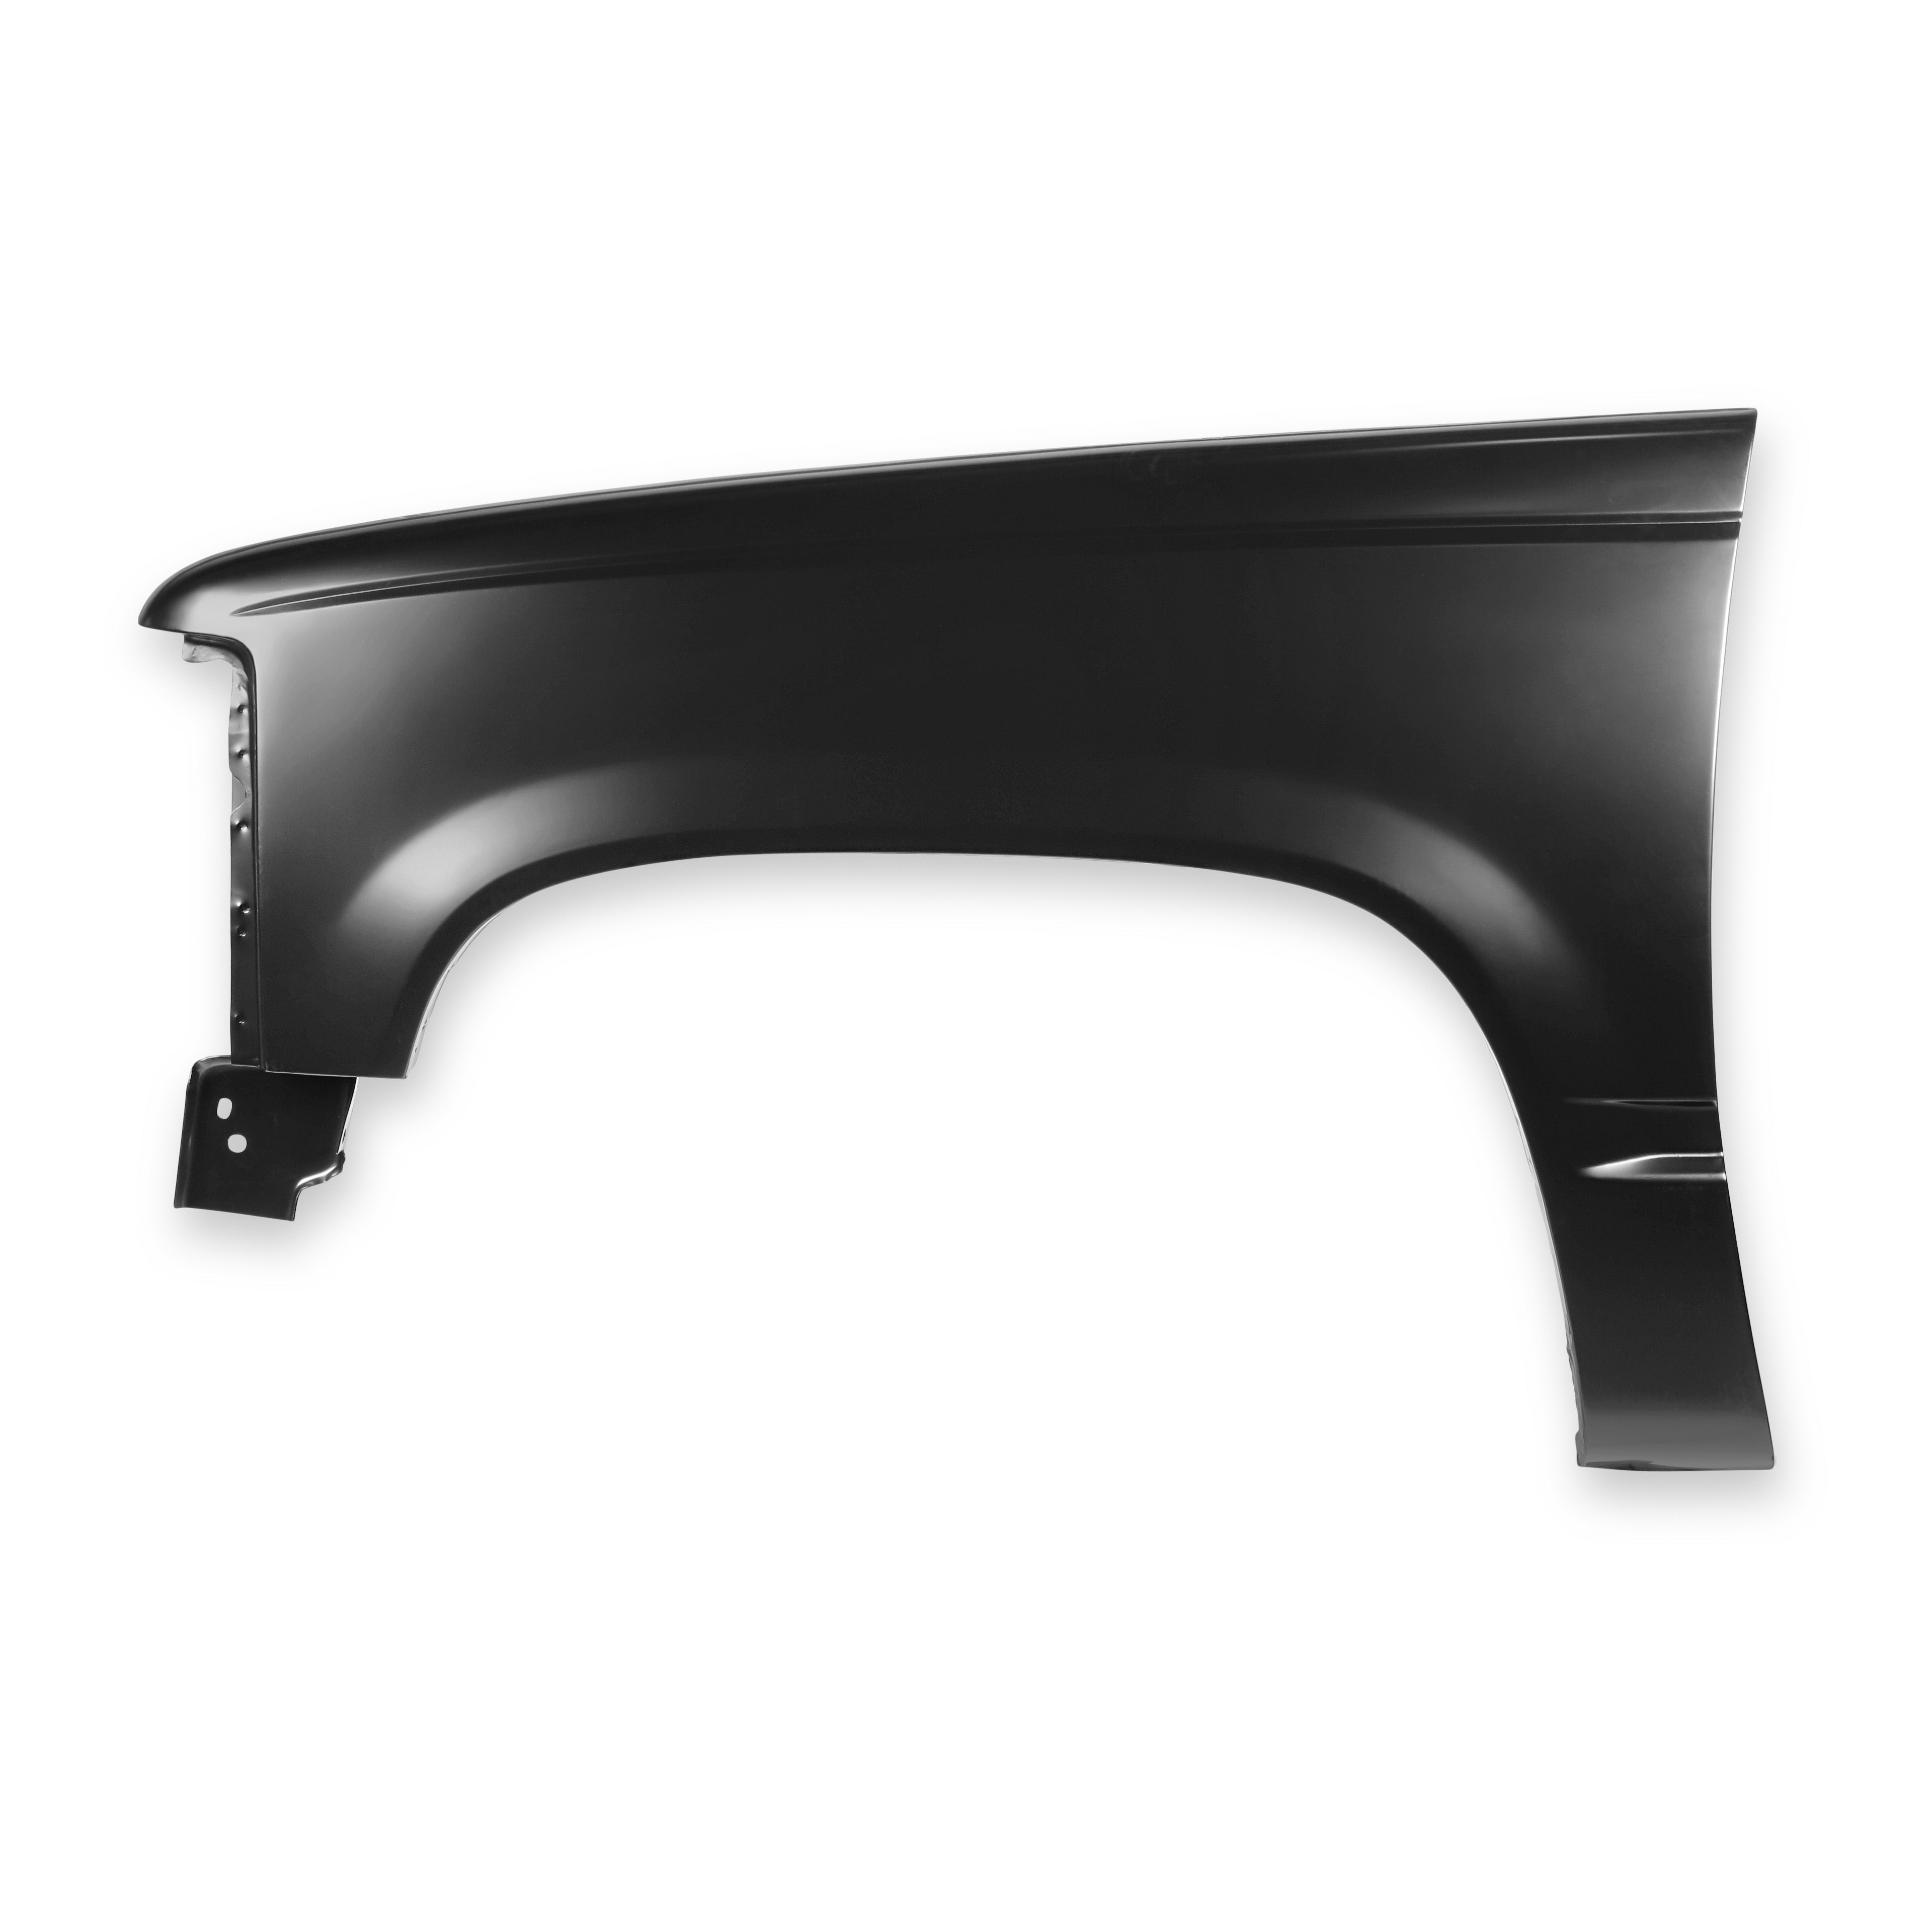 Holley Classic Trucks GMT400 Front Fender - LH pn 04-452